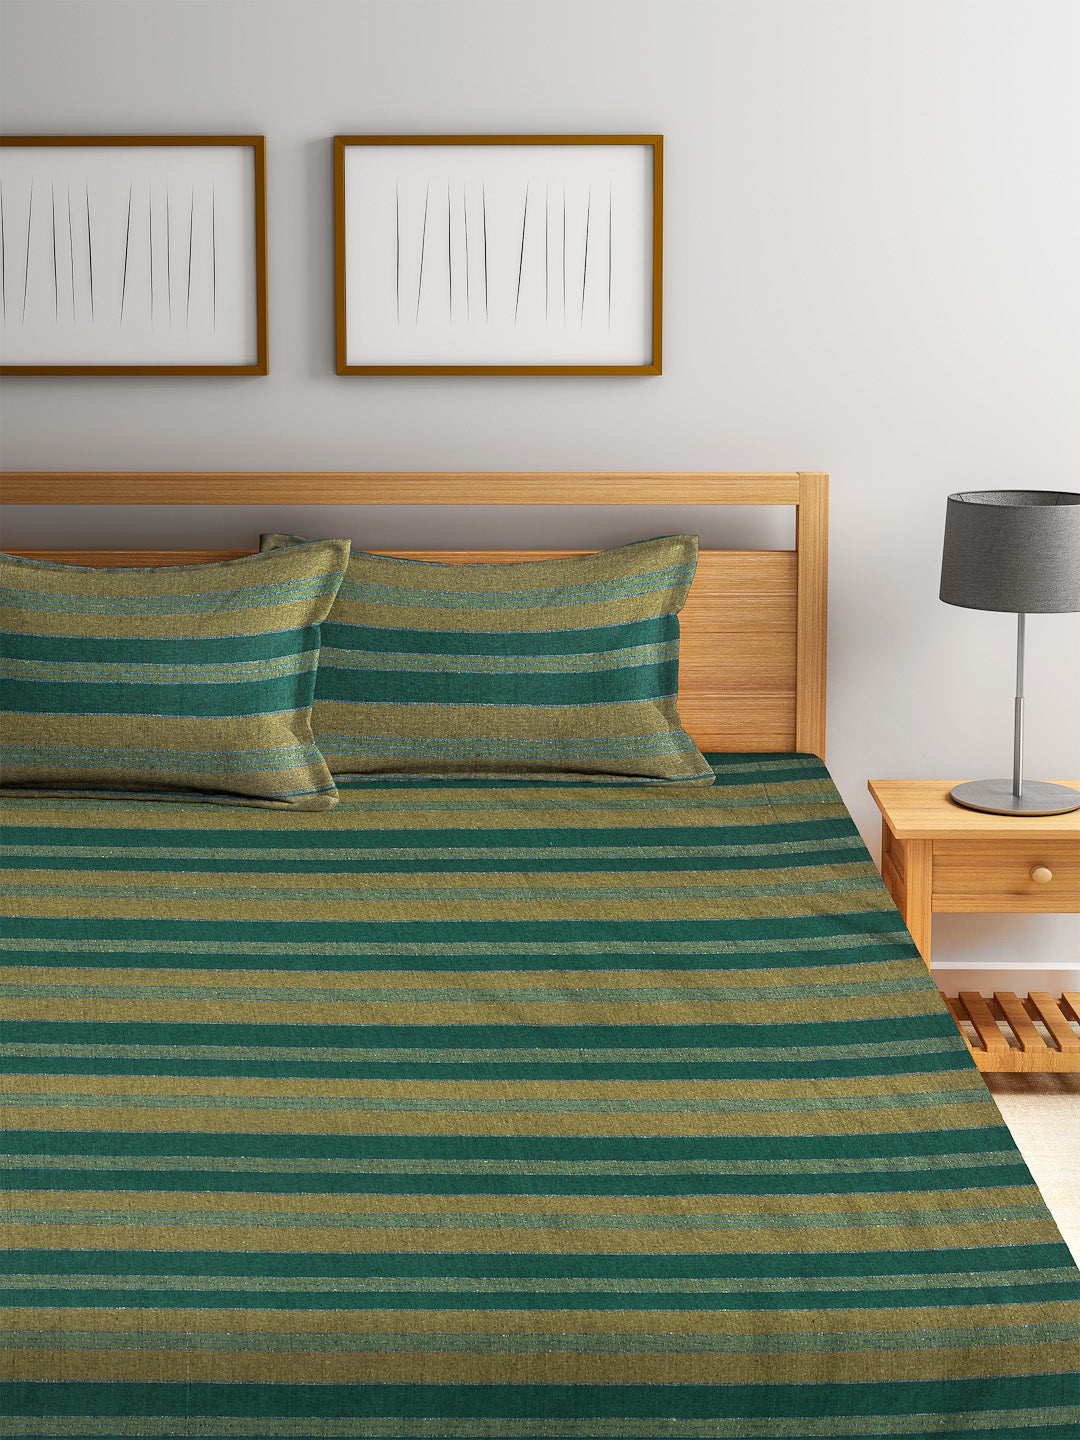 Arrabi Green Striped Handwoven Cotton Double King Size Bedsheet with 2 Pillow Covers (260 x 260 cm)